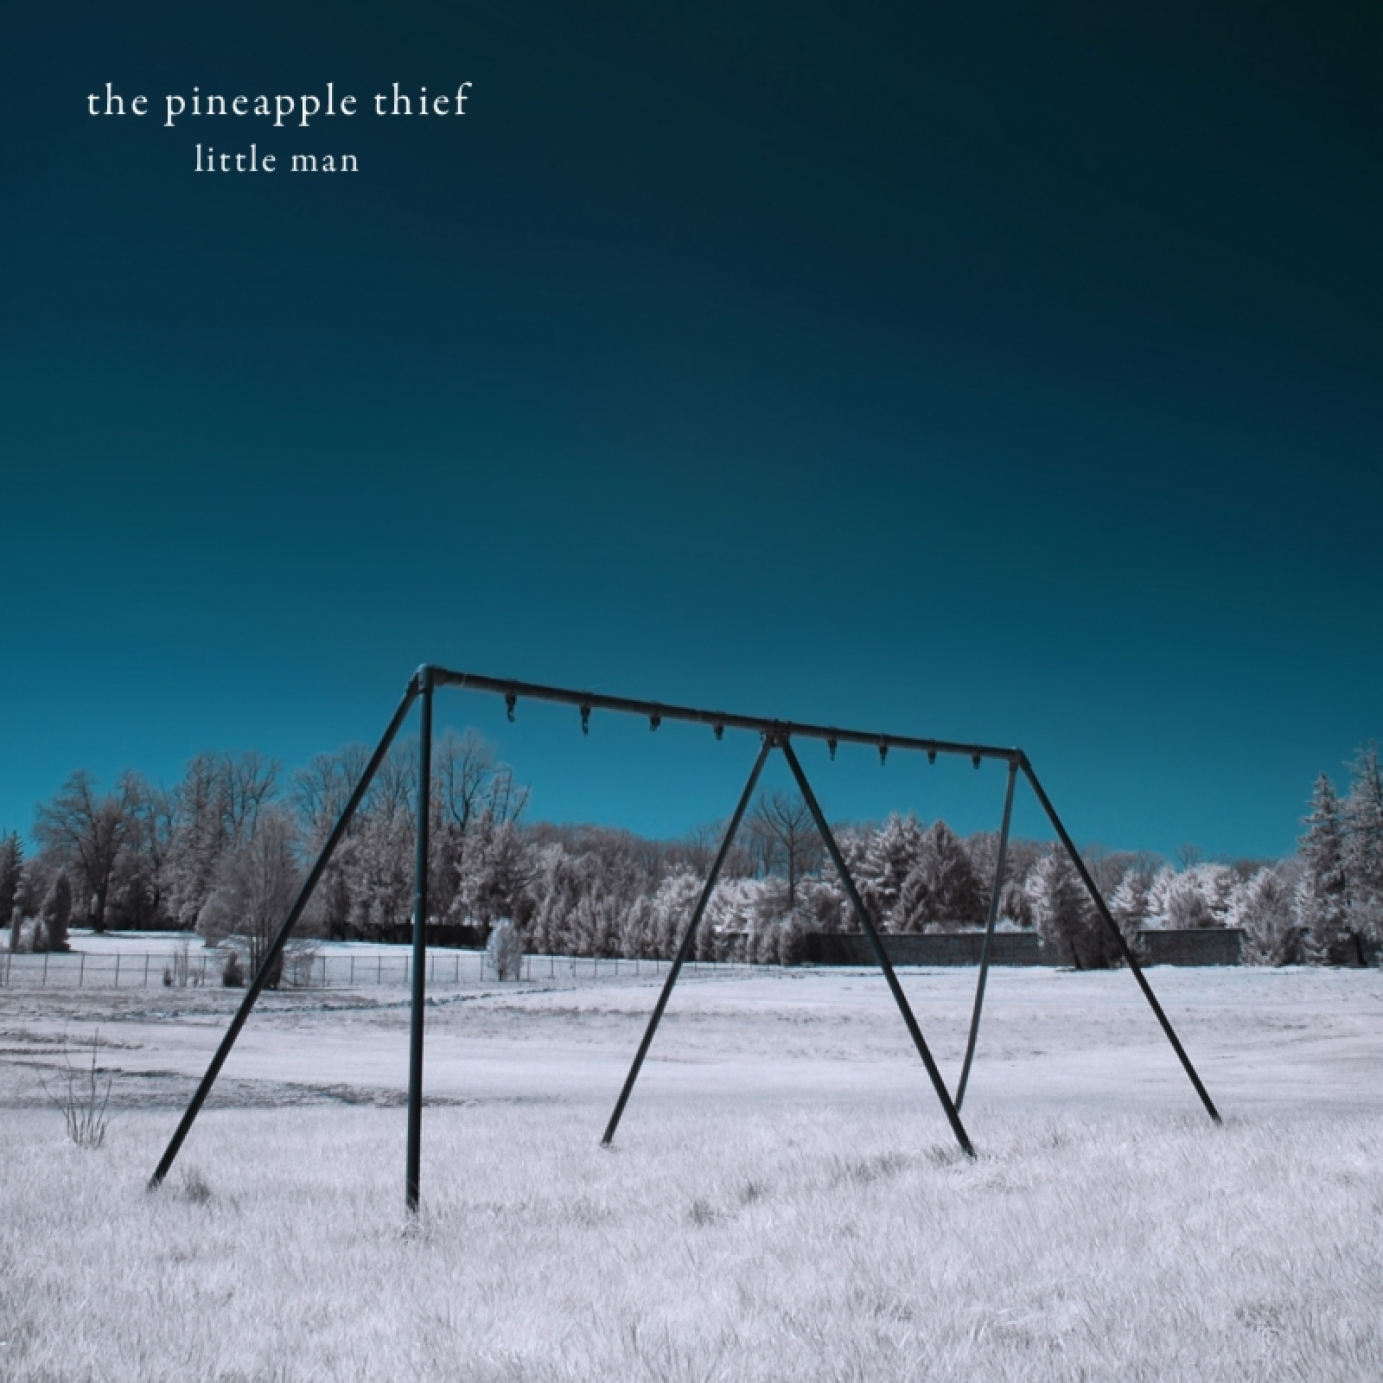 The Pineapple Thief - album art direction & video commissioning